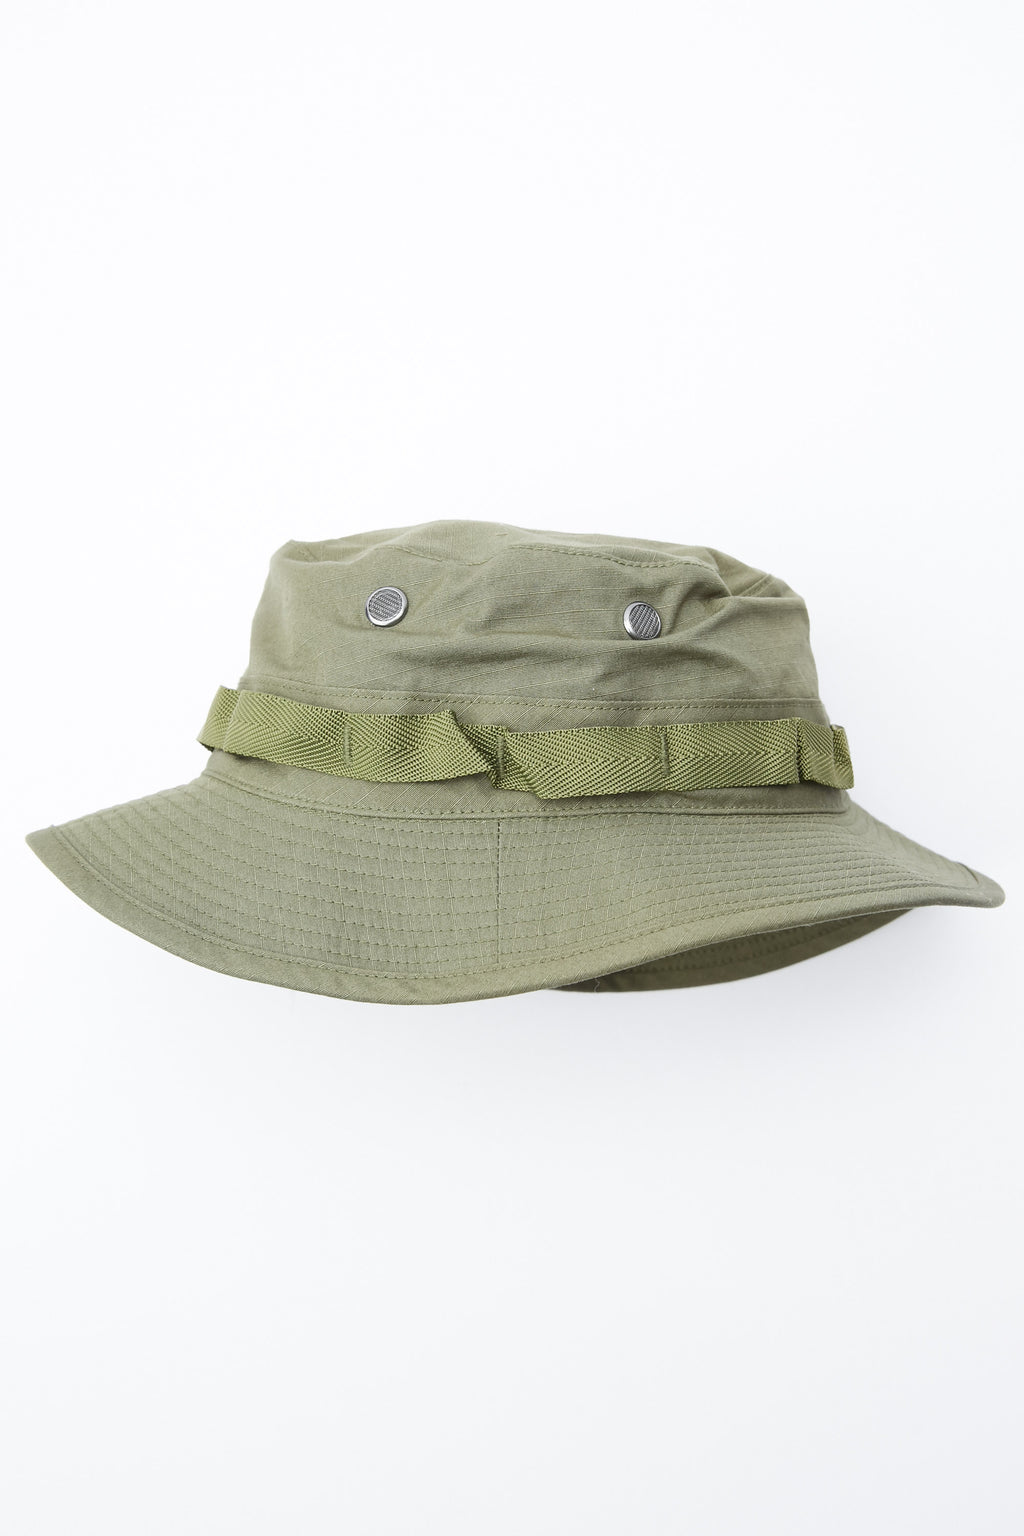 Orslow US Army Jungle Hat - Army